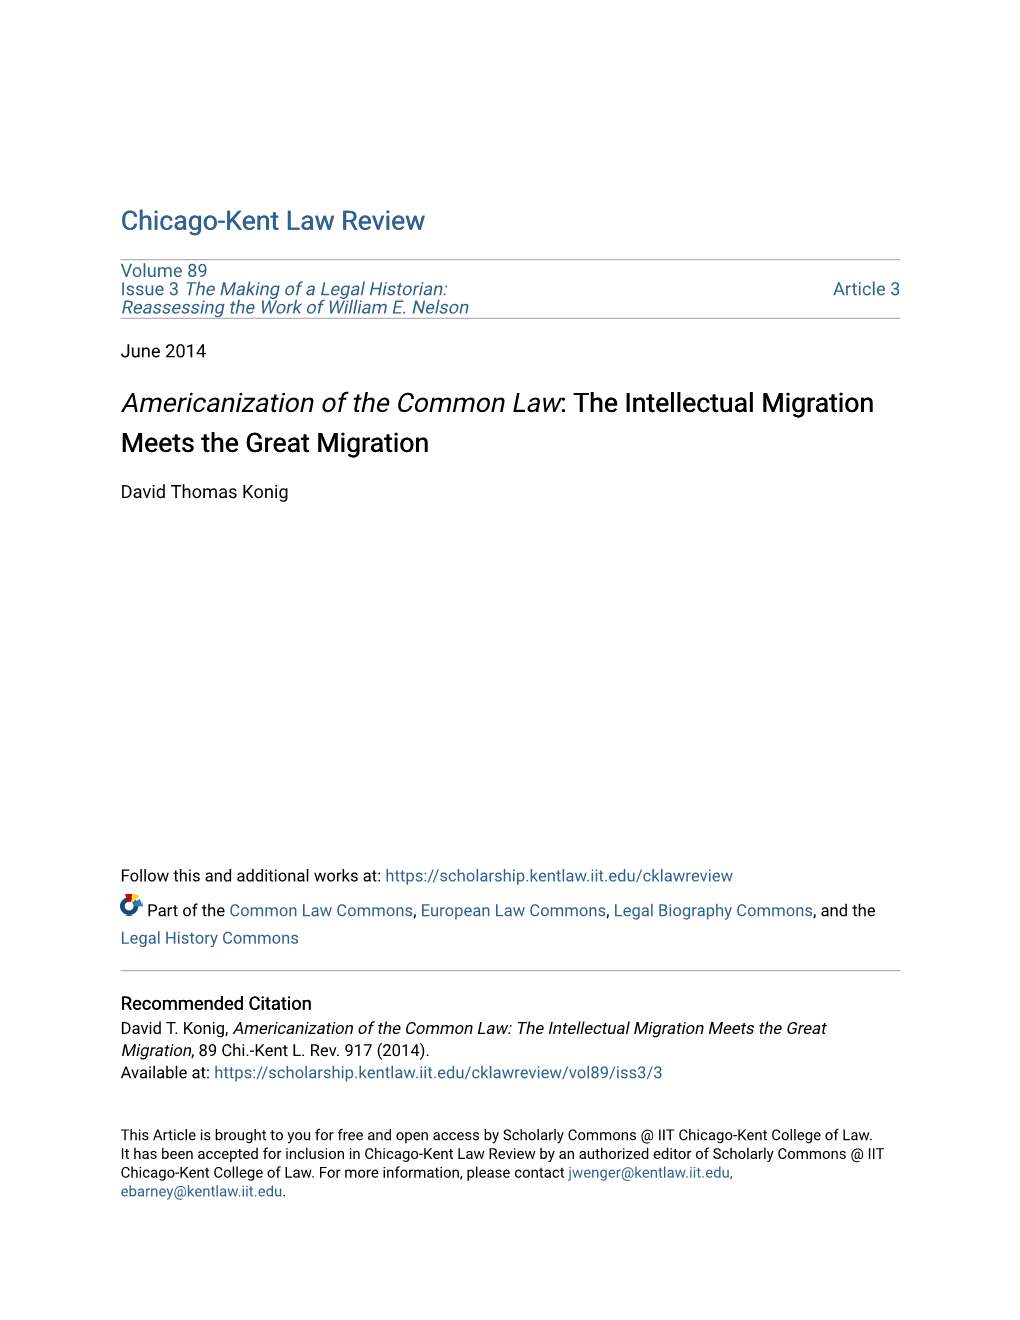 Americanization of the Common Law: the Intellectual Migration Meets the Great Migration